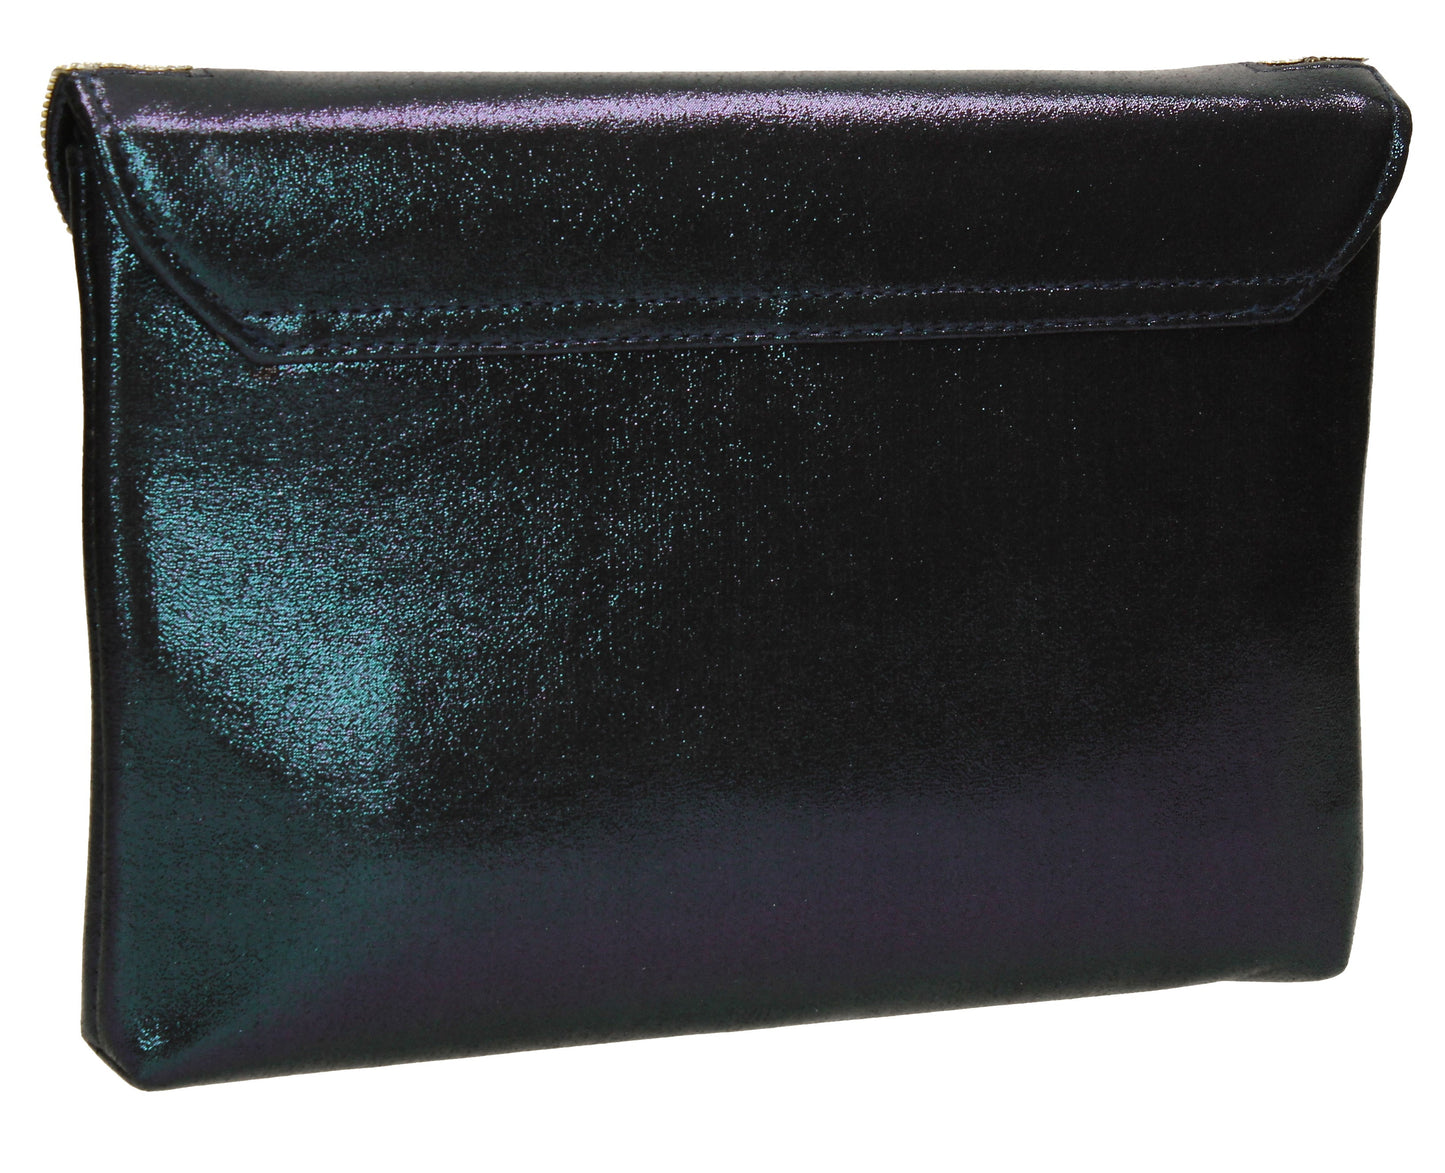 SWANKYSWANS Lilly Clutch Bag Navy Cute Cheap Clutch Bag For Weddings School and Work